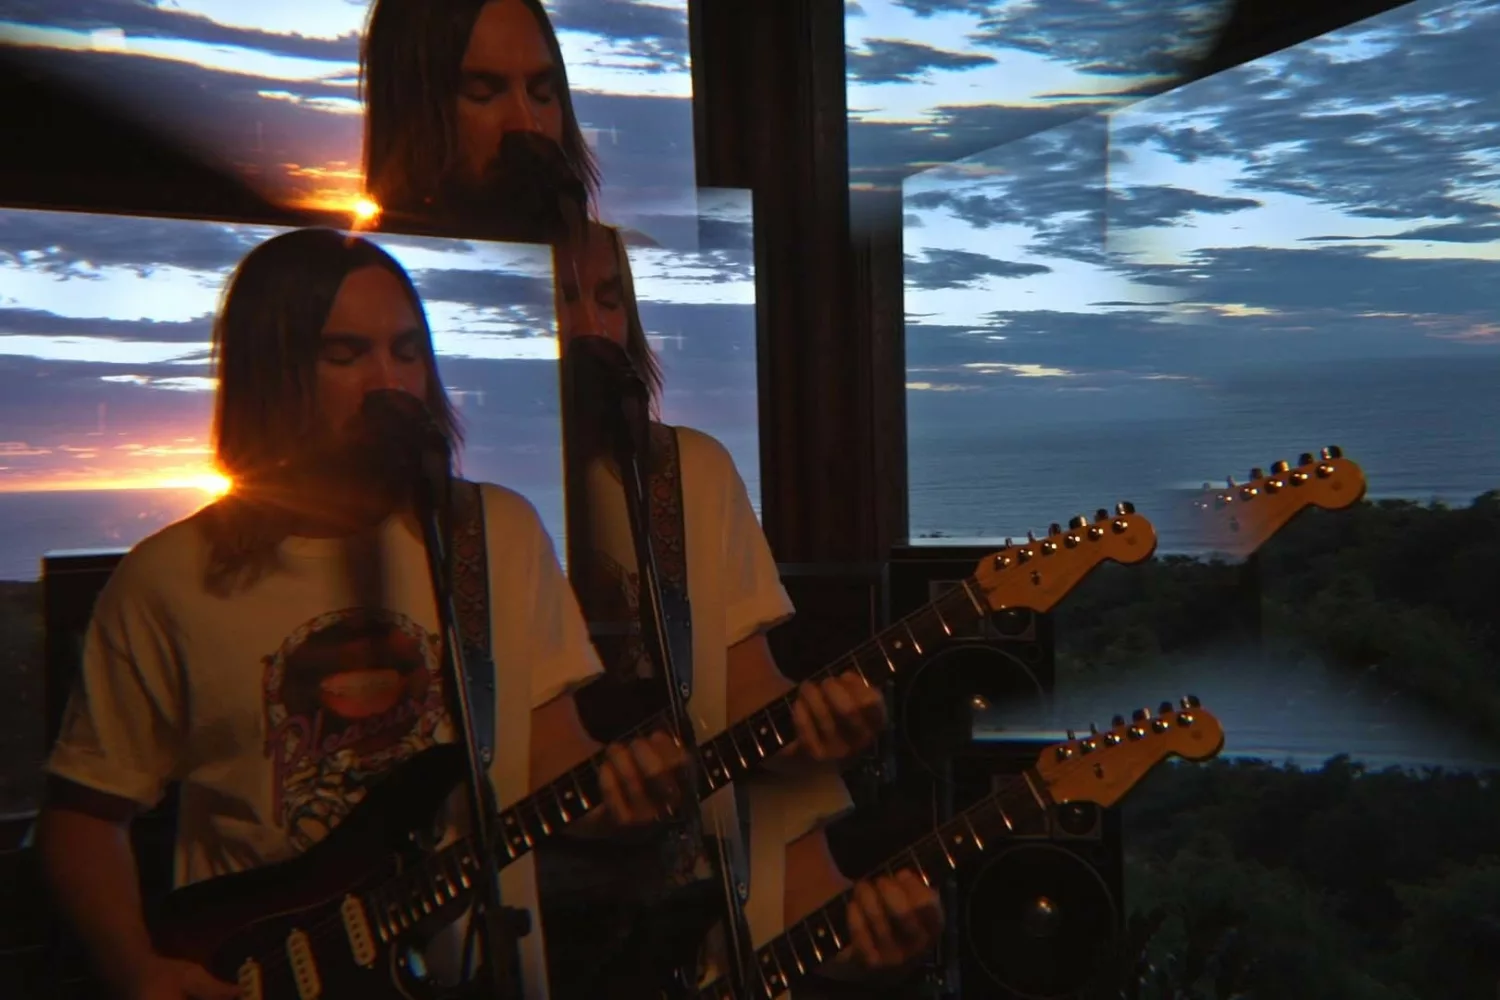 Tame Impala celebrate ‘Innerspeaker’ with Wave House live stream